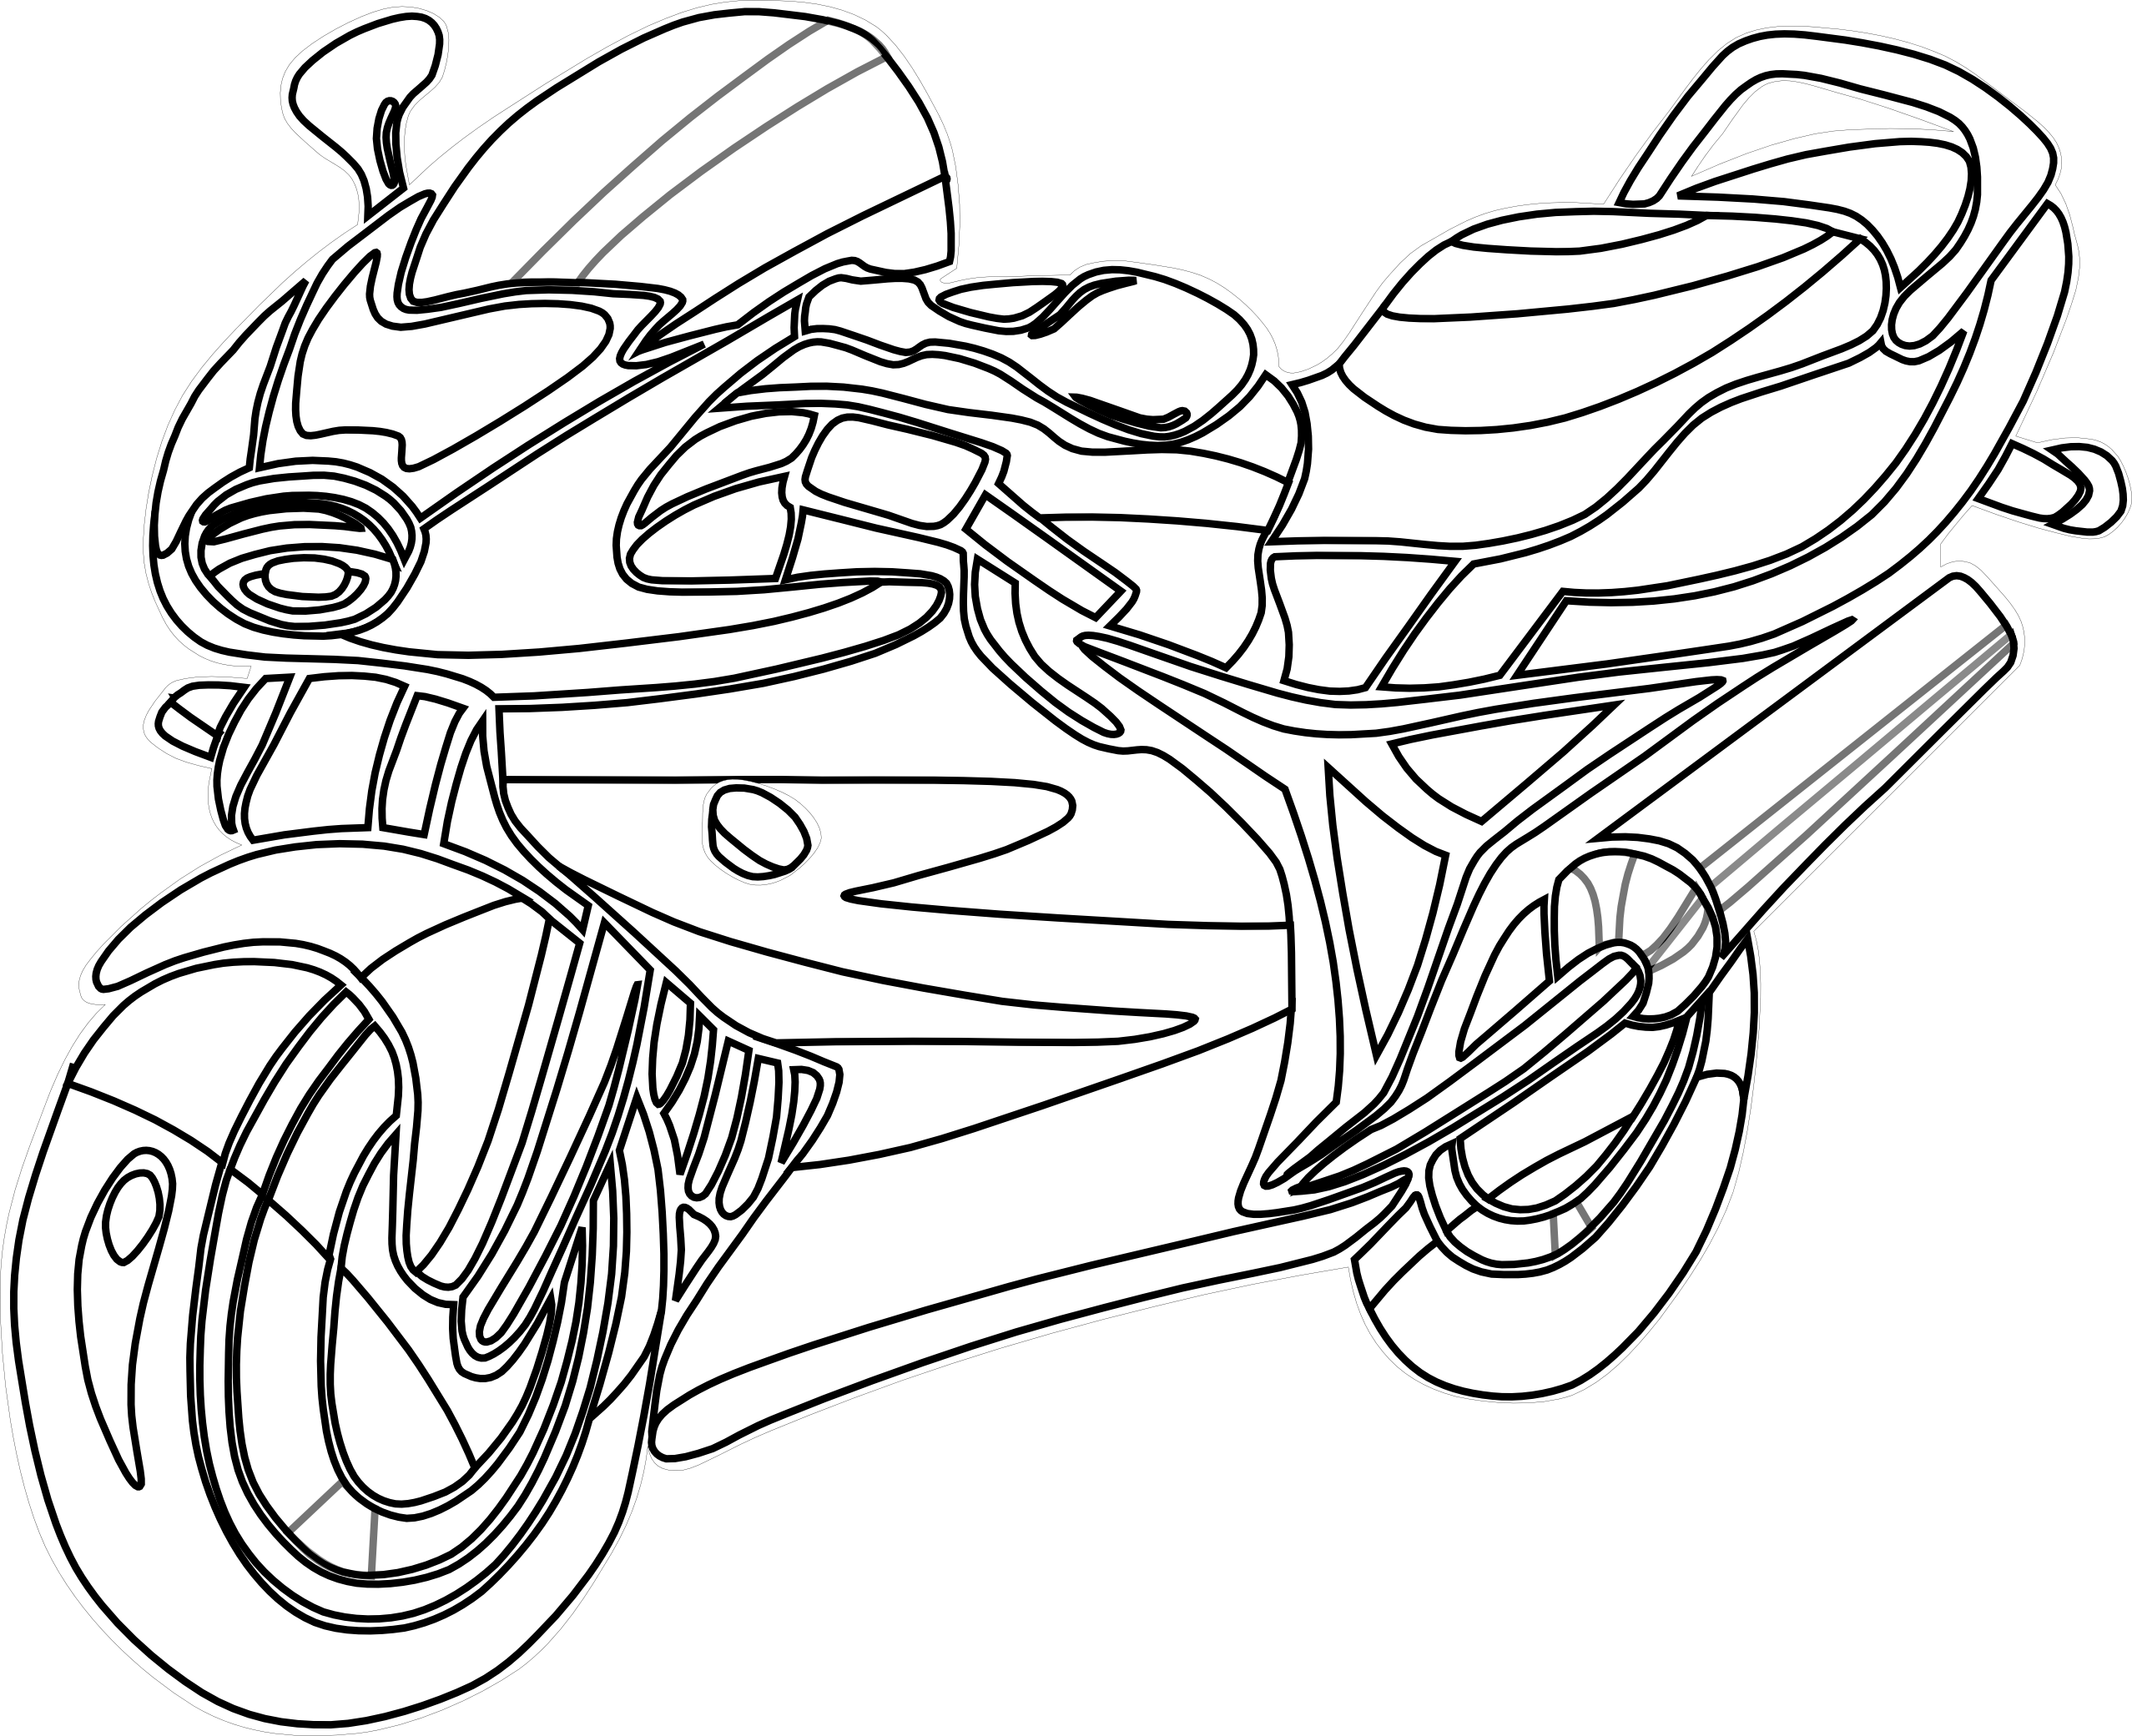 Free Motorbike Cliparts, Download Free Clip Art, Free Clip.